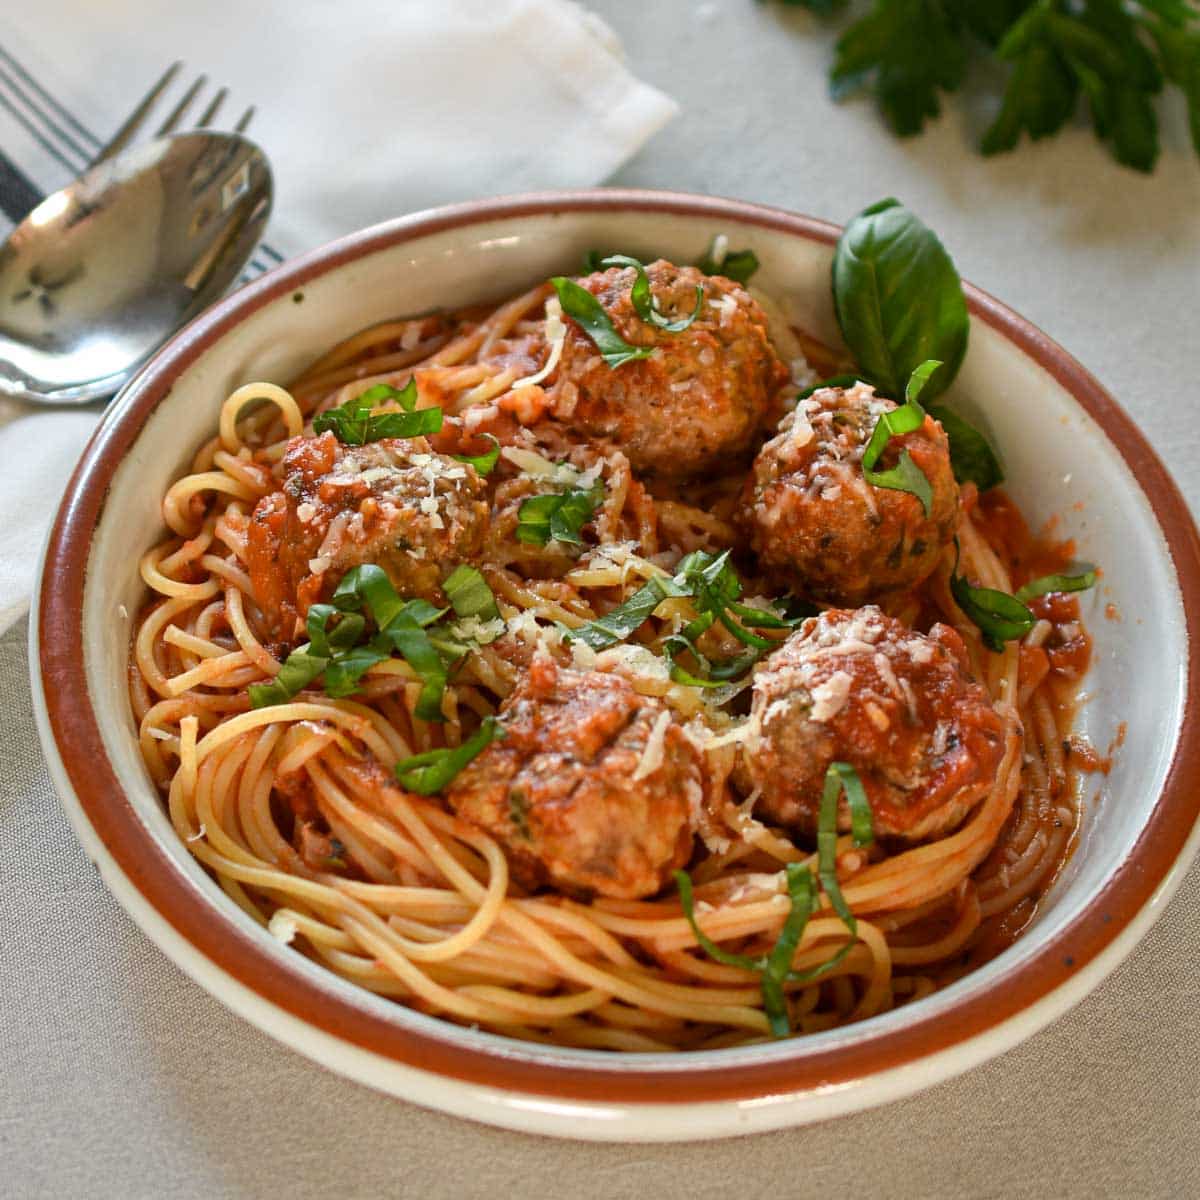 Meatballs with spaghetti and marinara sauce in a bowl.